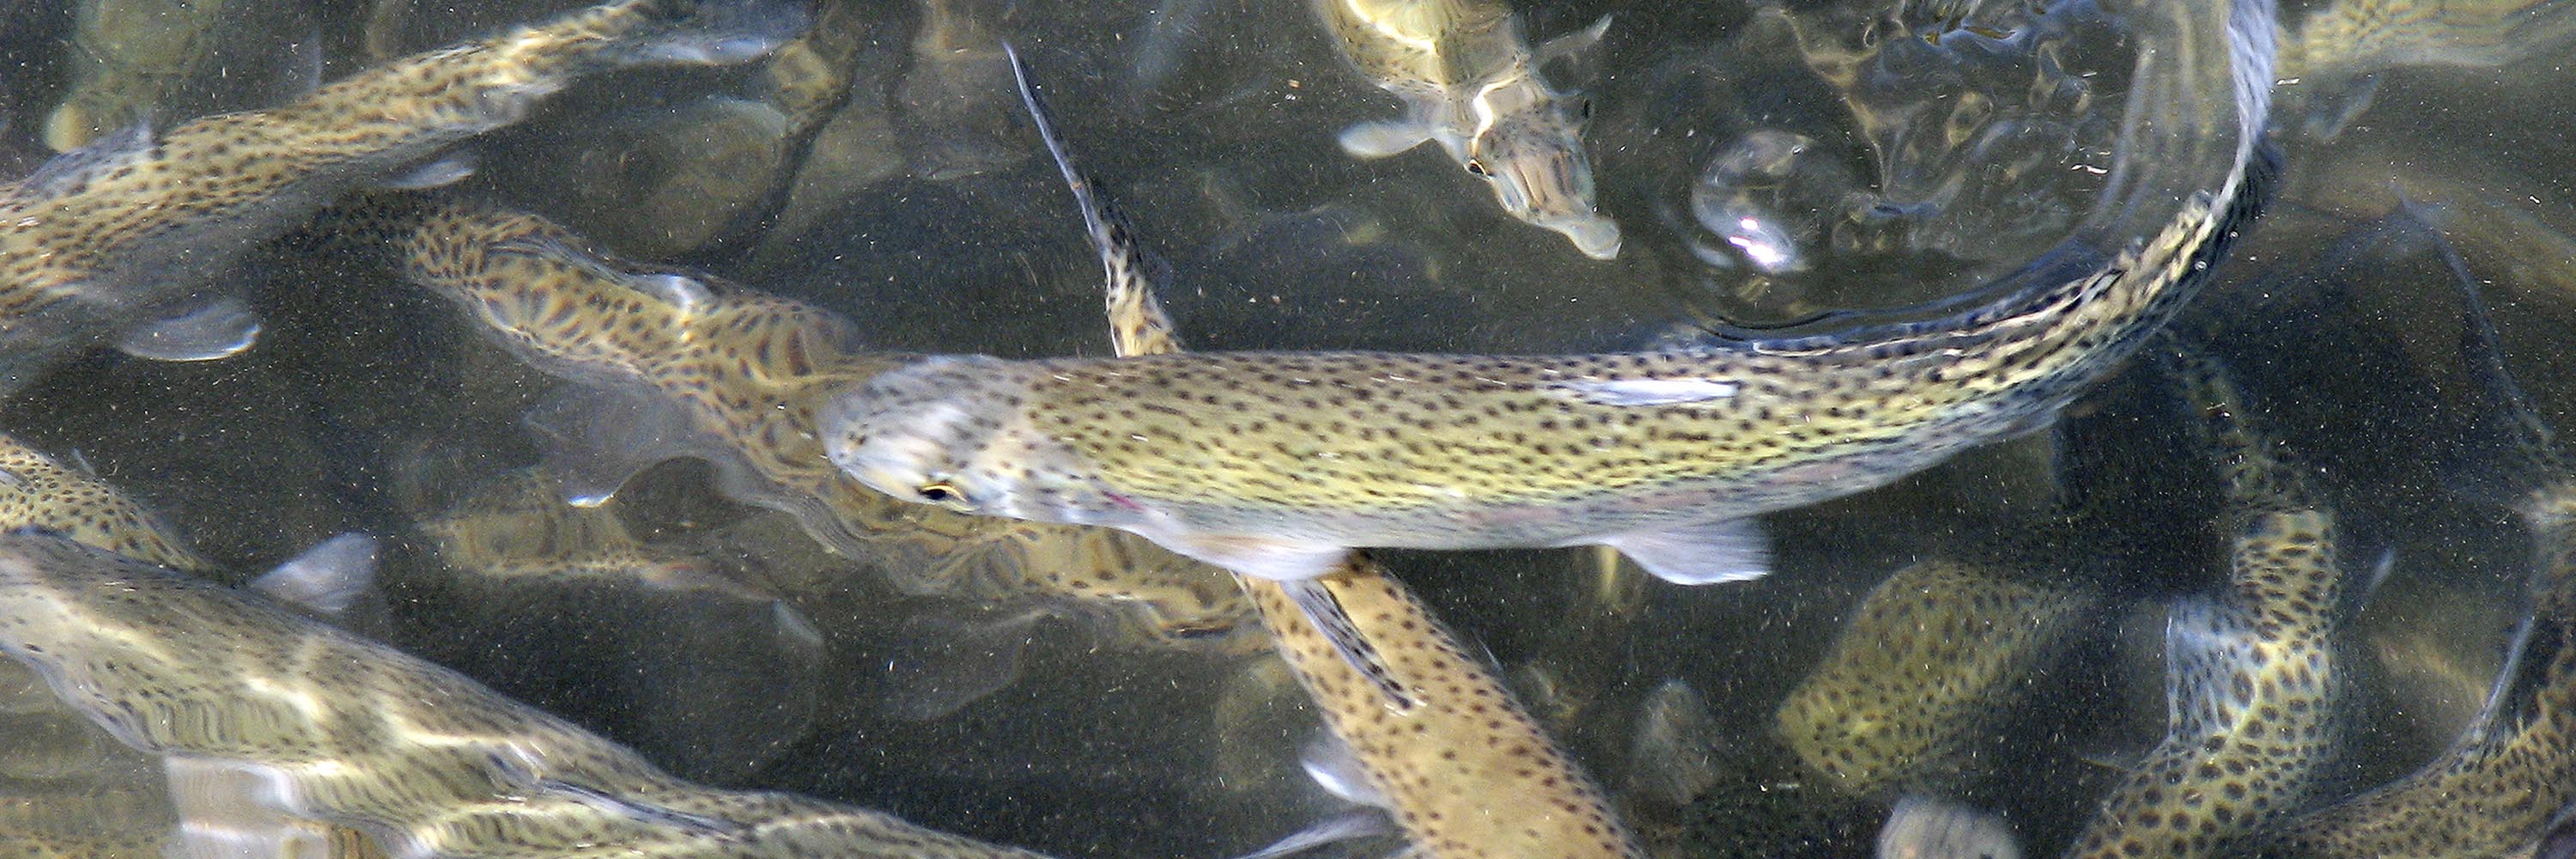 Water,Trout,Fish,Fin,Brown trout,Serpent